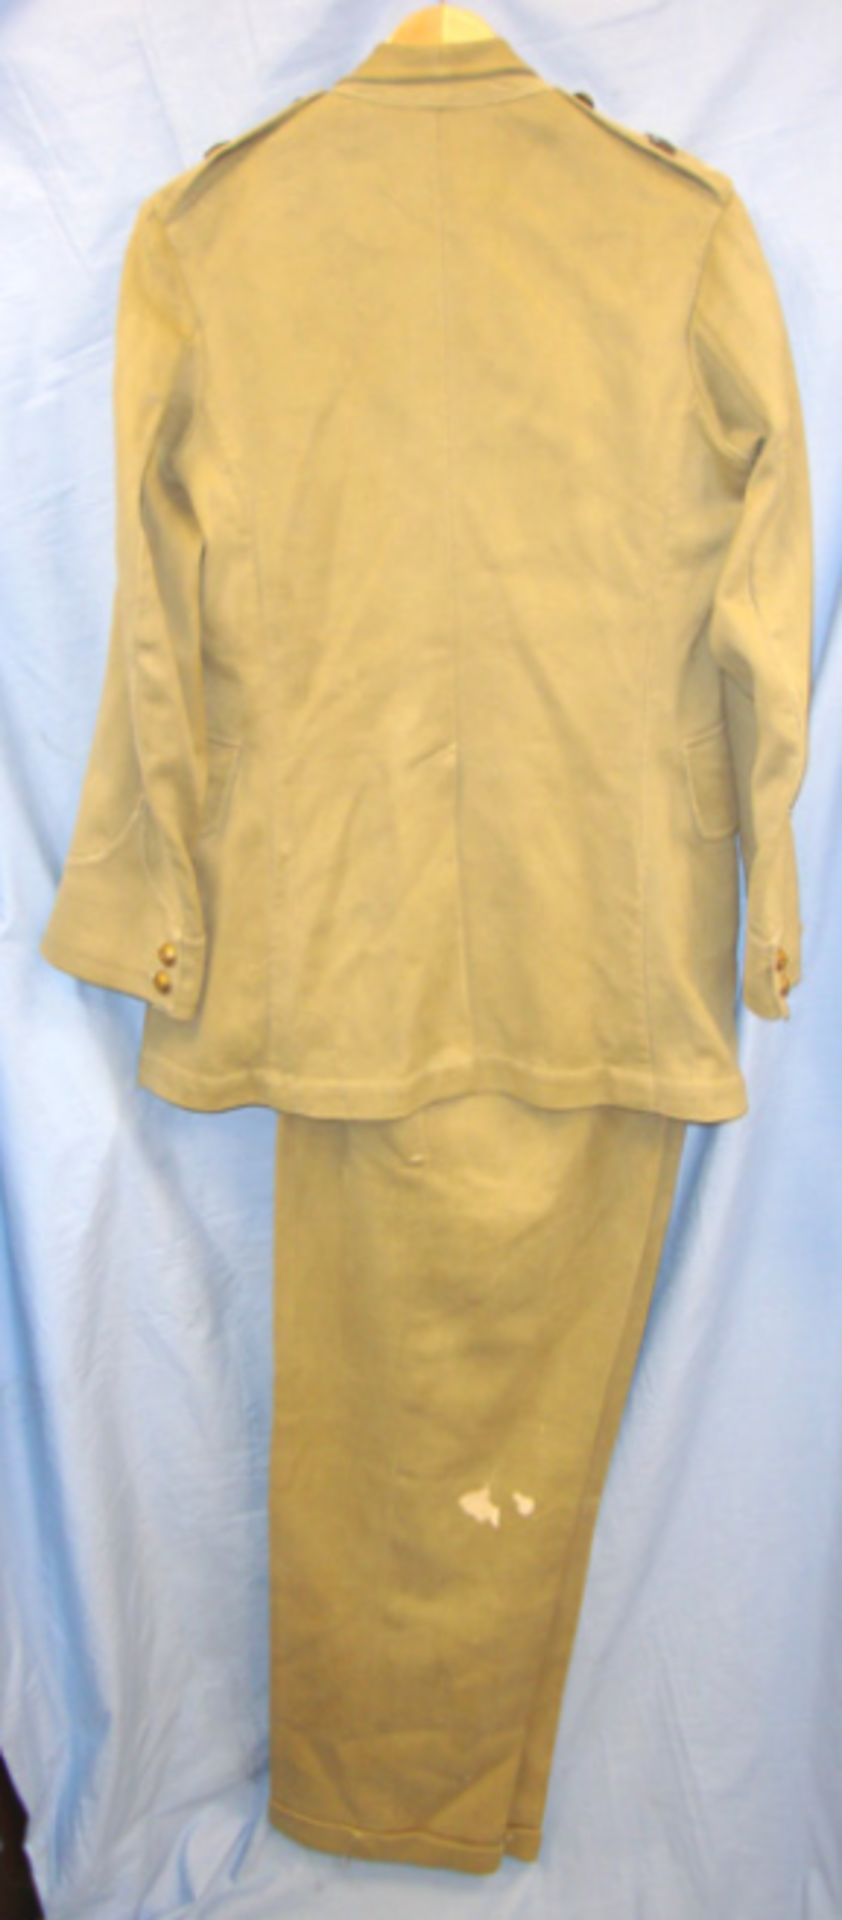 WW1/WW2 British Army Manchester Regiment Officer's Tropical Uniform. - Image 2 of 3